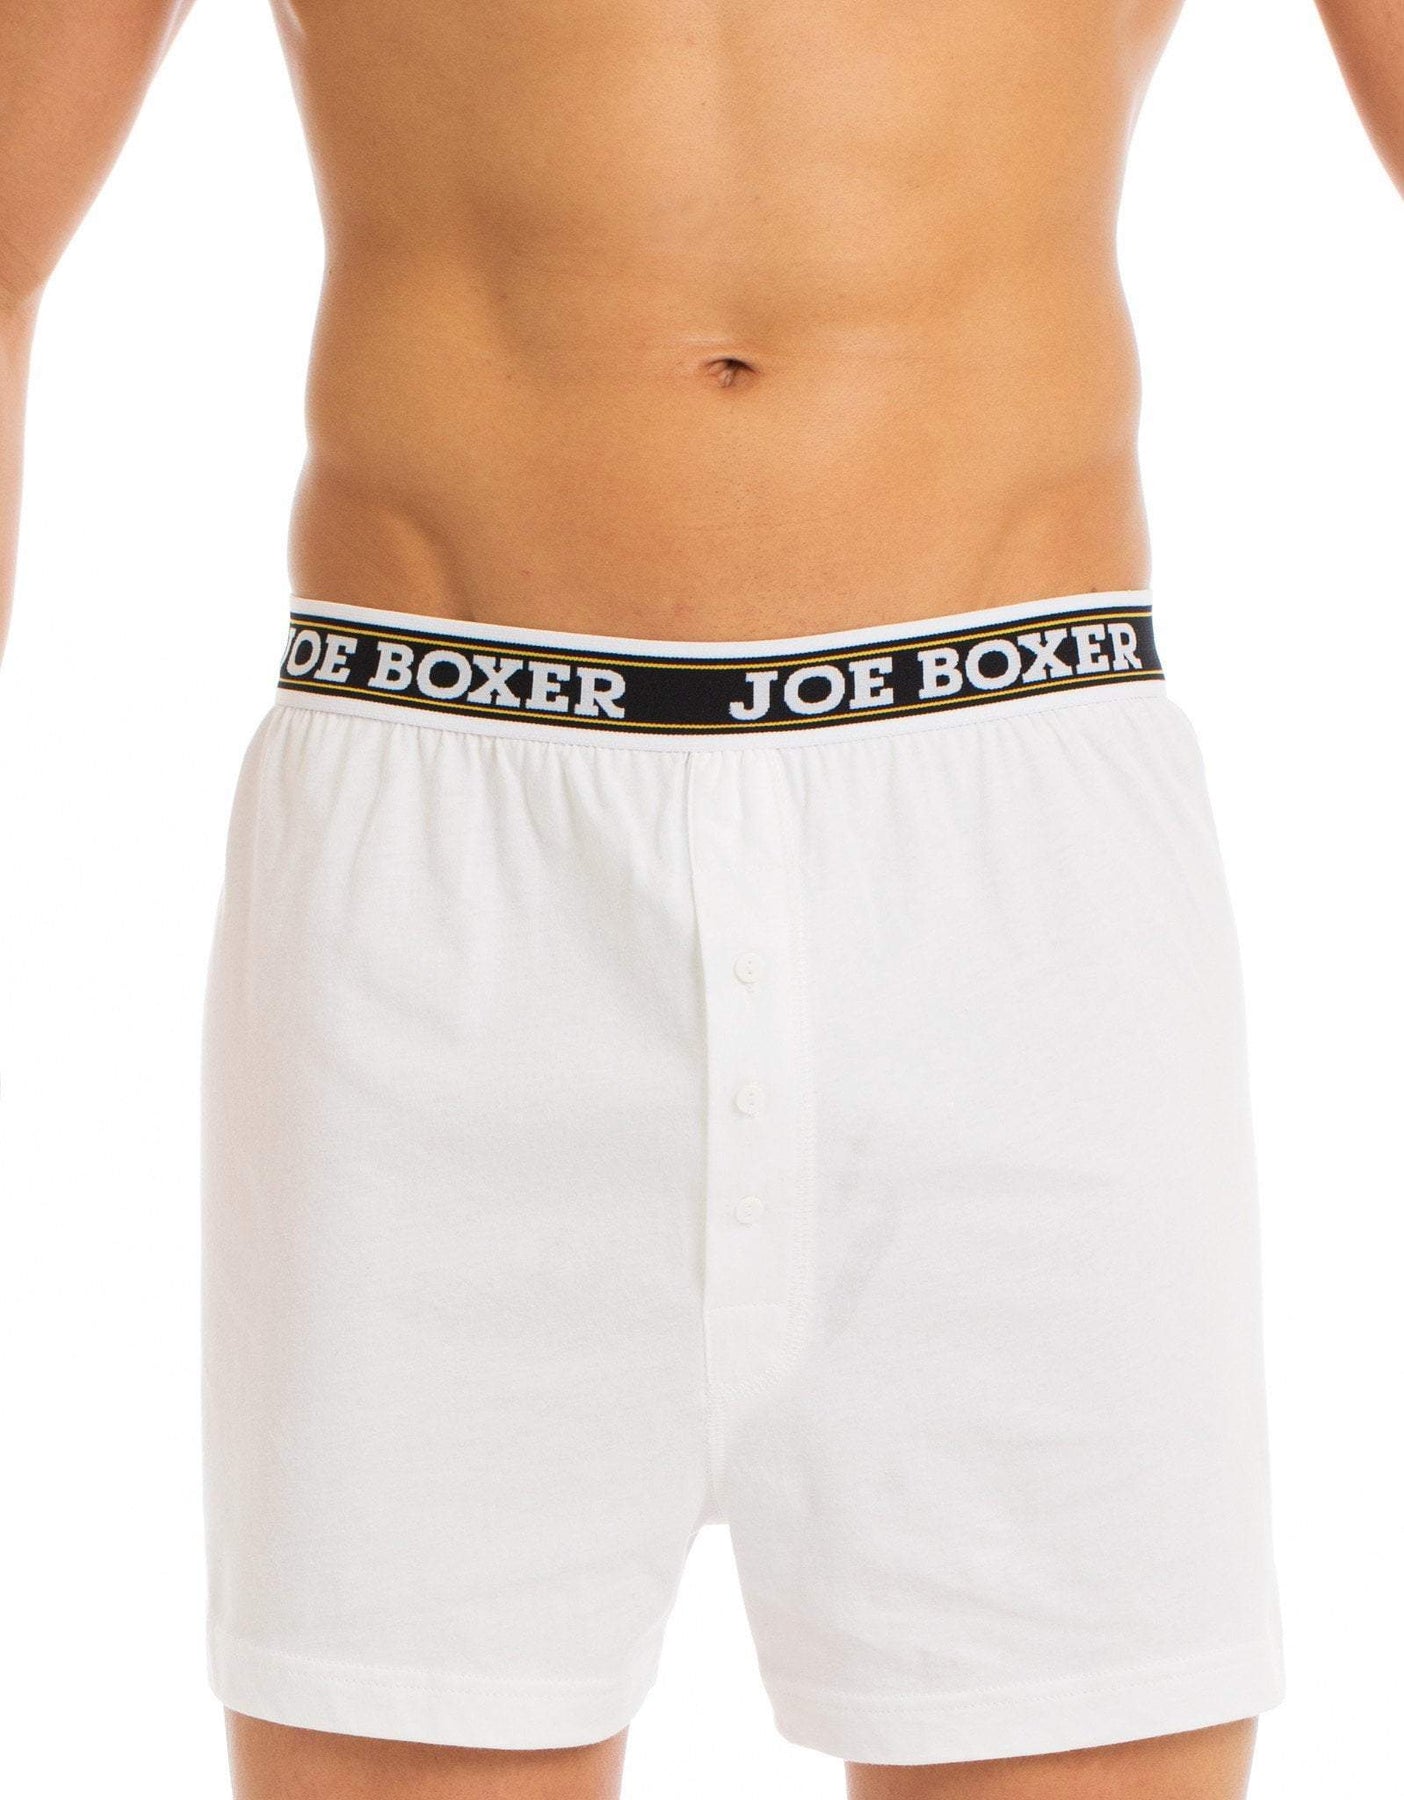 Dice - Set Of (6) Printed Boxer - For Men And Boys @ Best Price